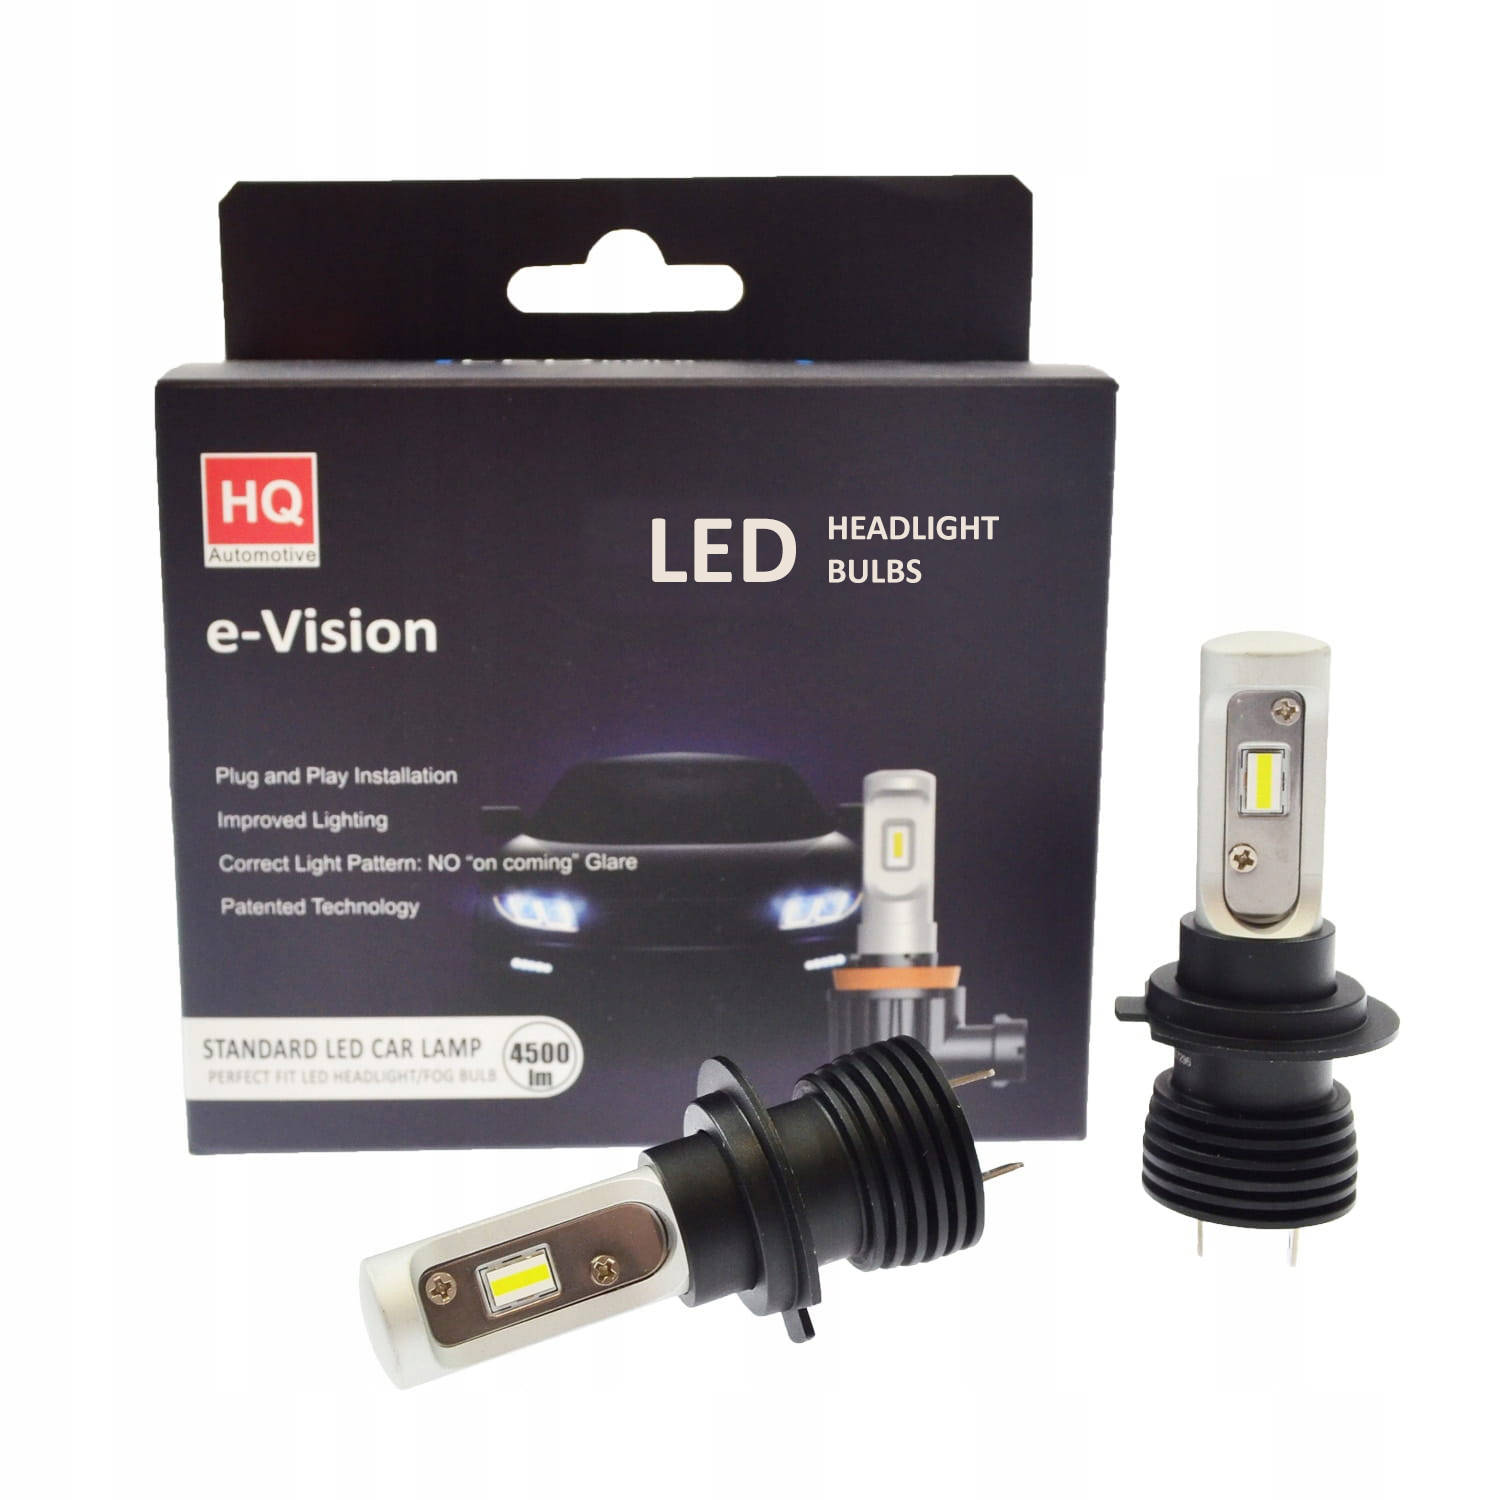 High Power H7 LED Conversion Kit for Headlights - 5 Year Warranty